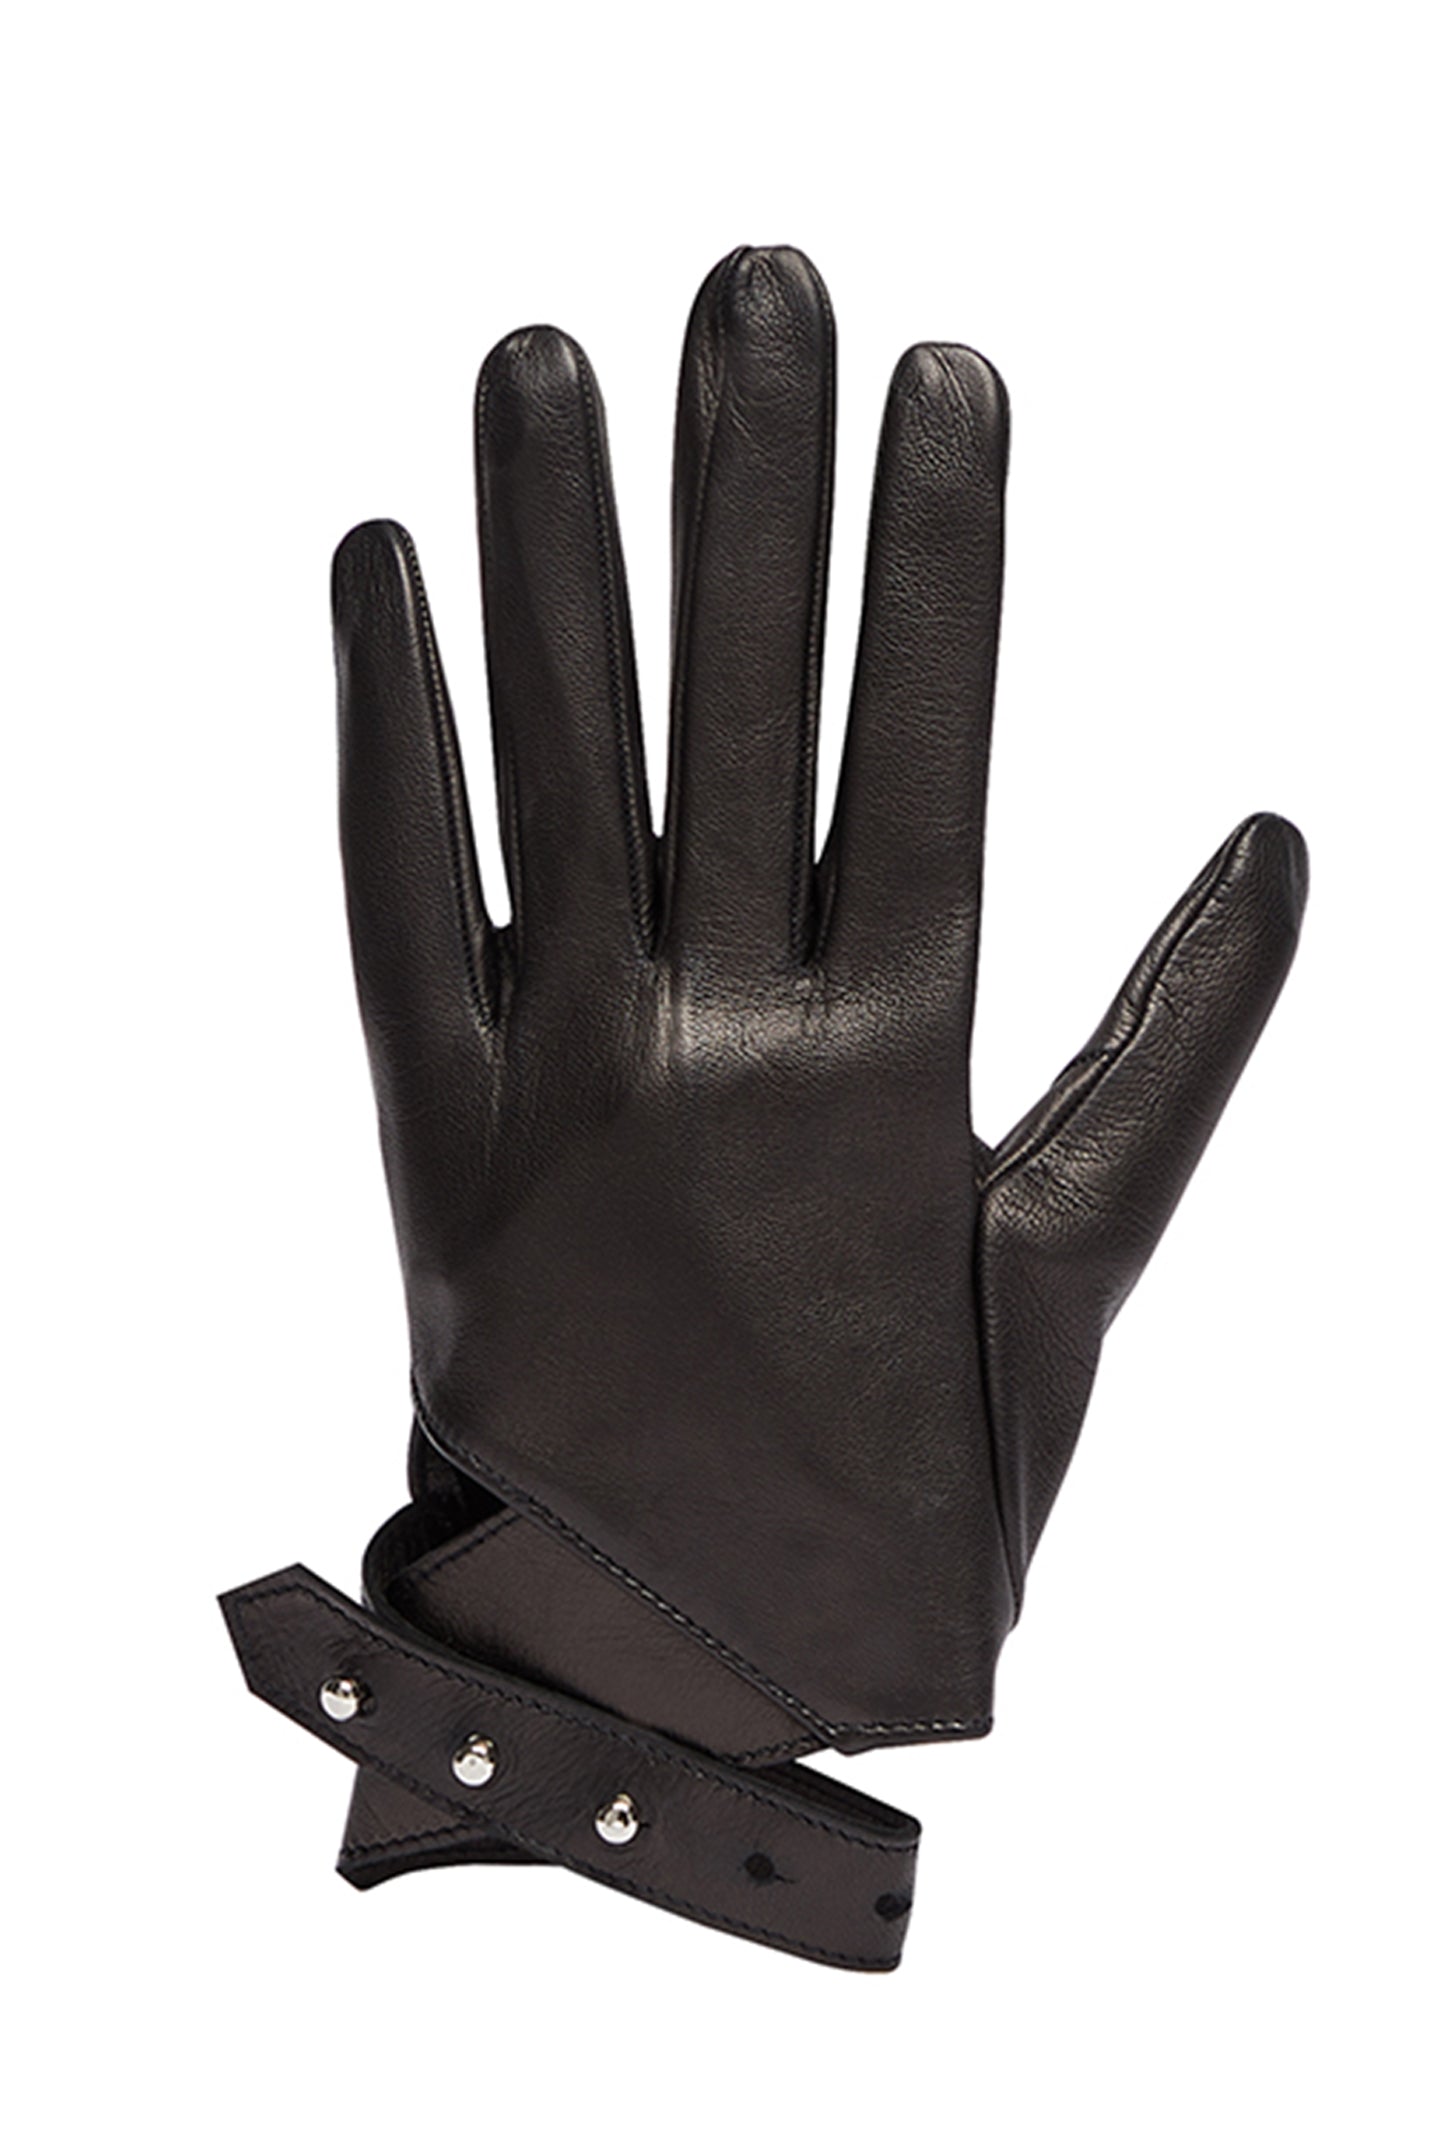 PRITCH ELEMENT Leather Cutout Gloves in Pitch Black